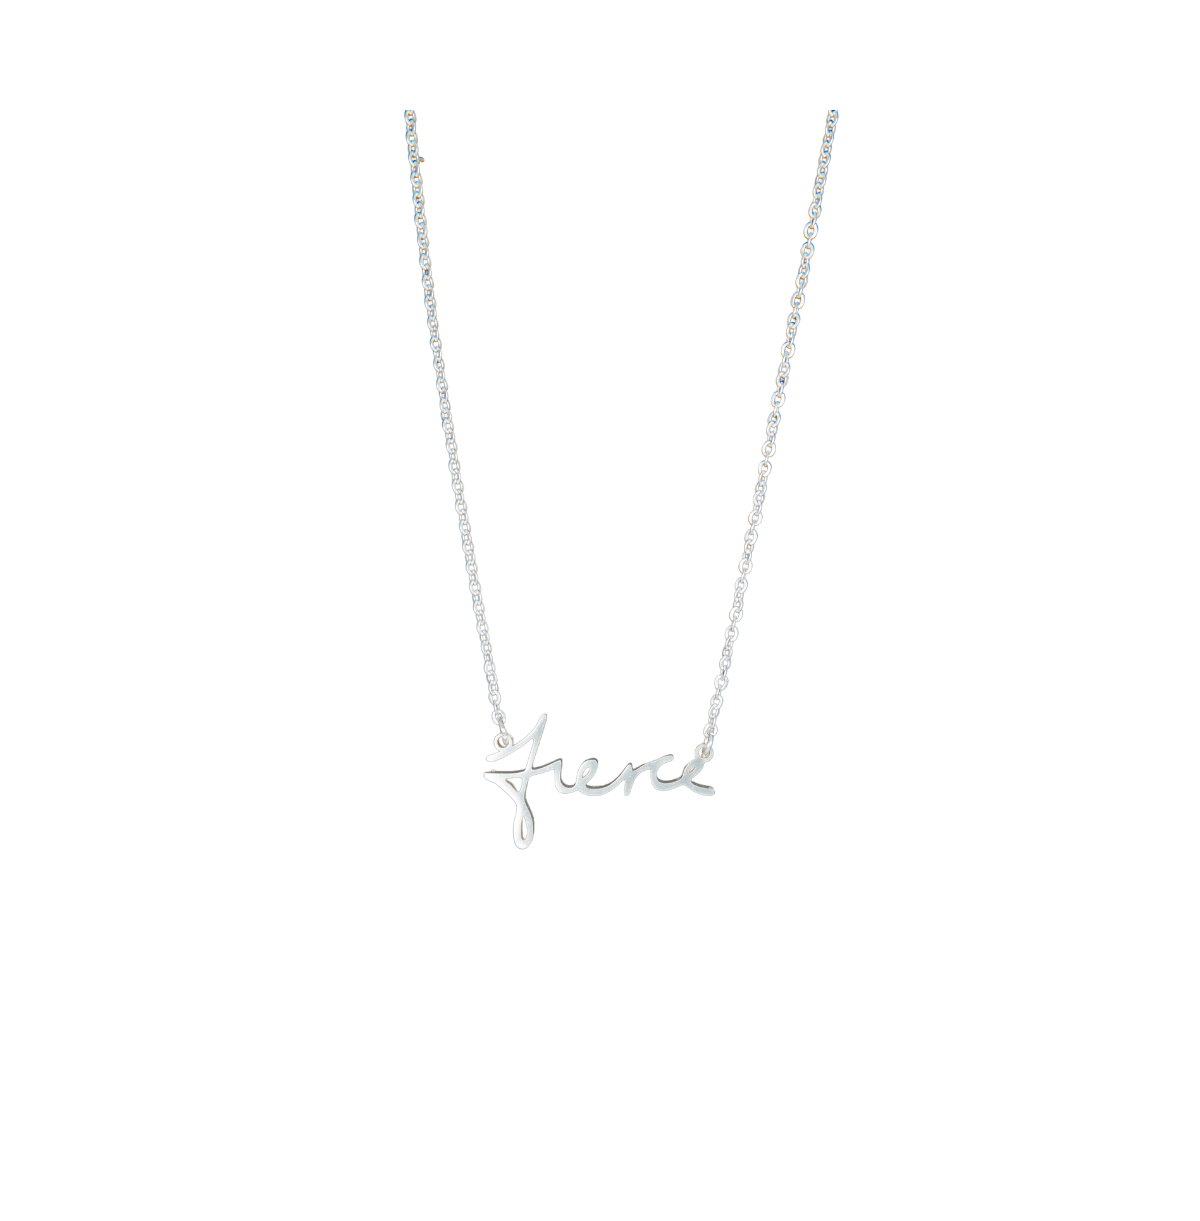 316L Absolute Affirmation Silver-Tone "Fierce" Necklace - Silver Plated